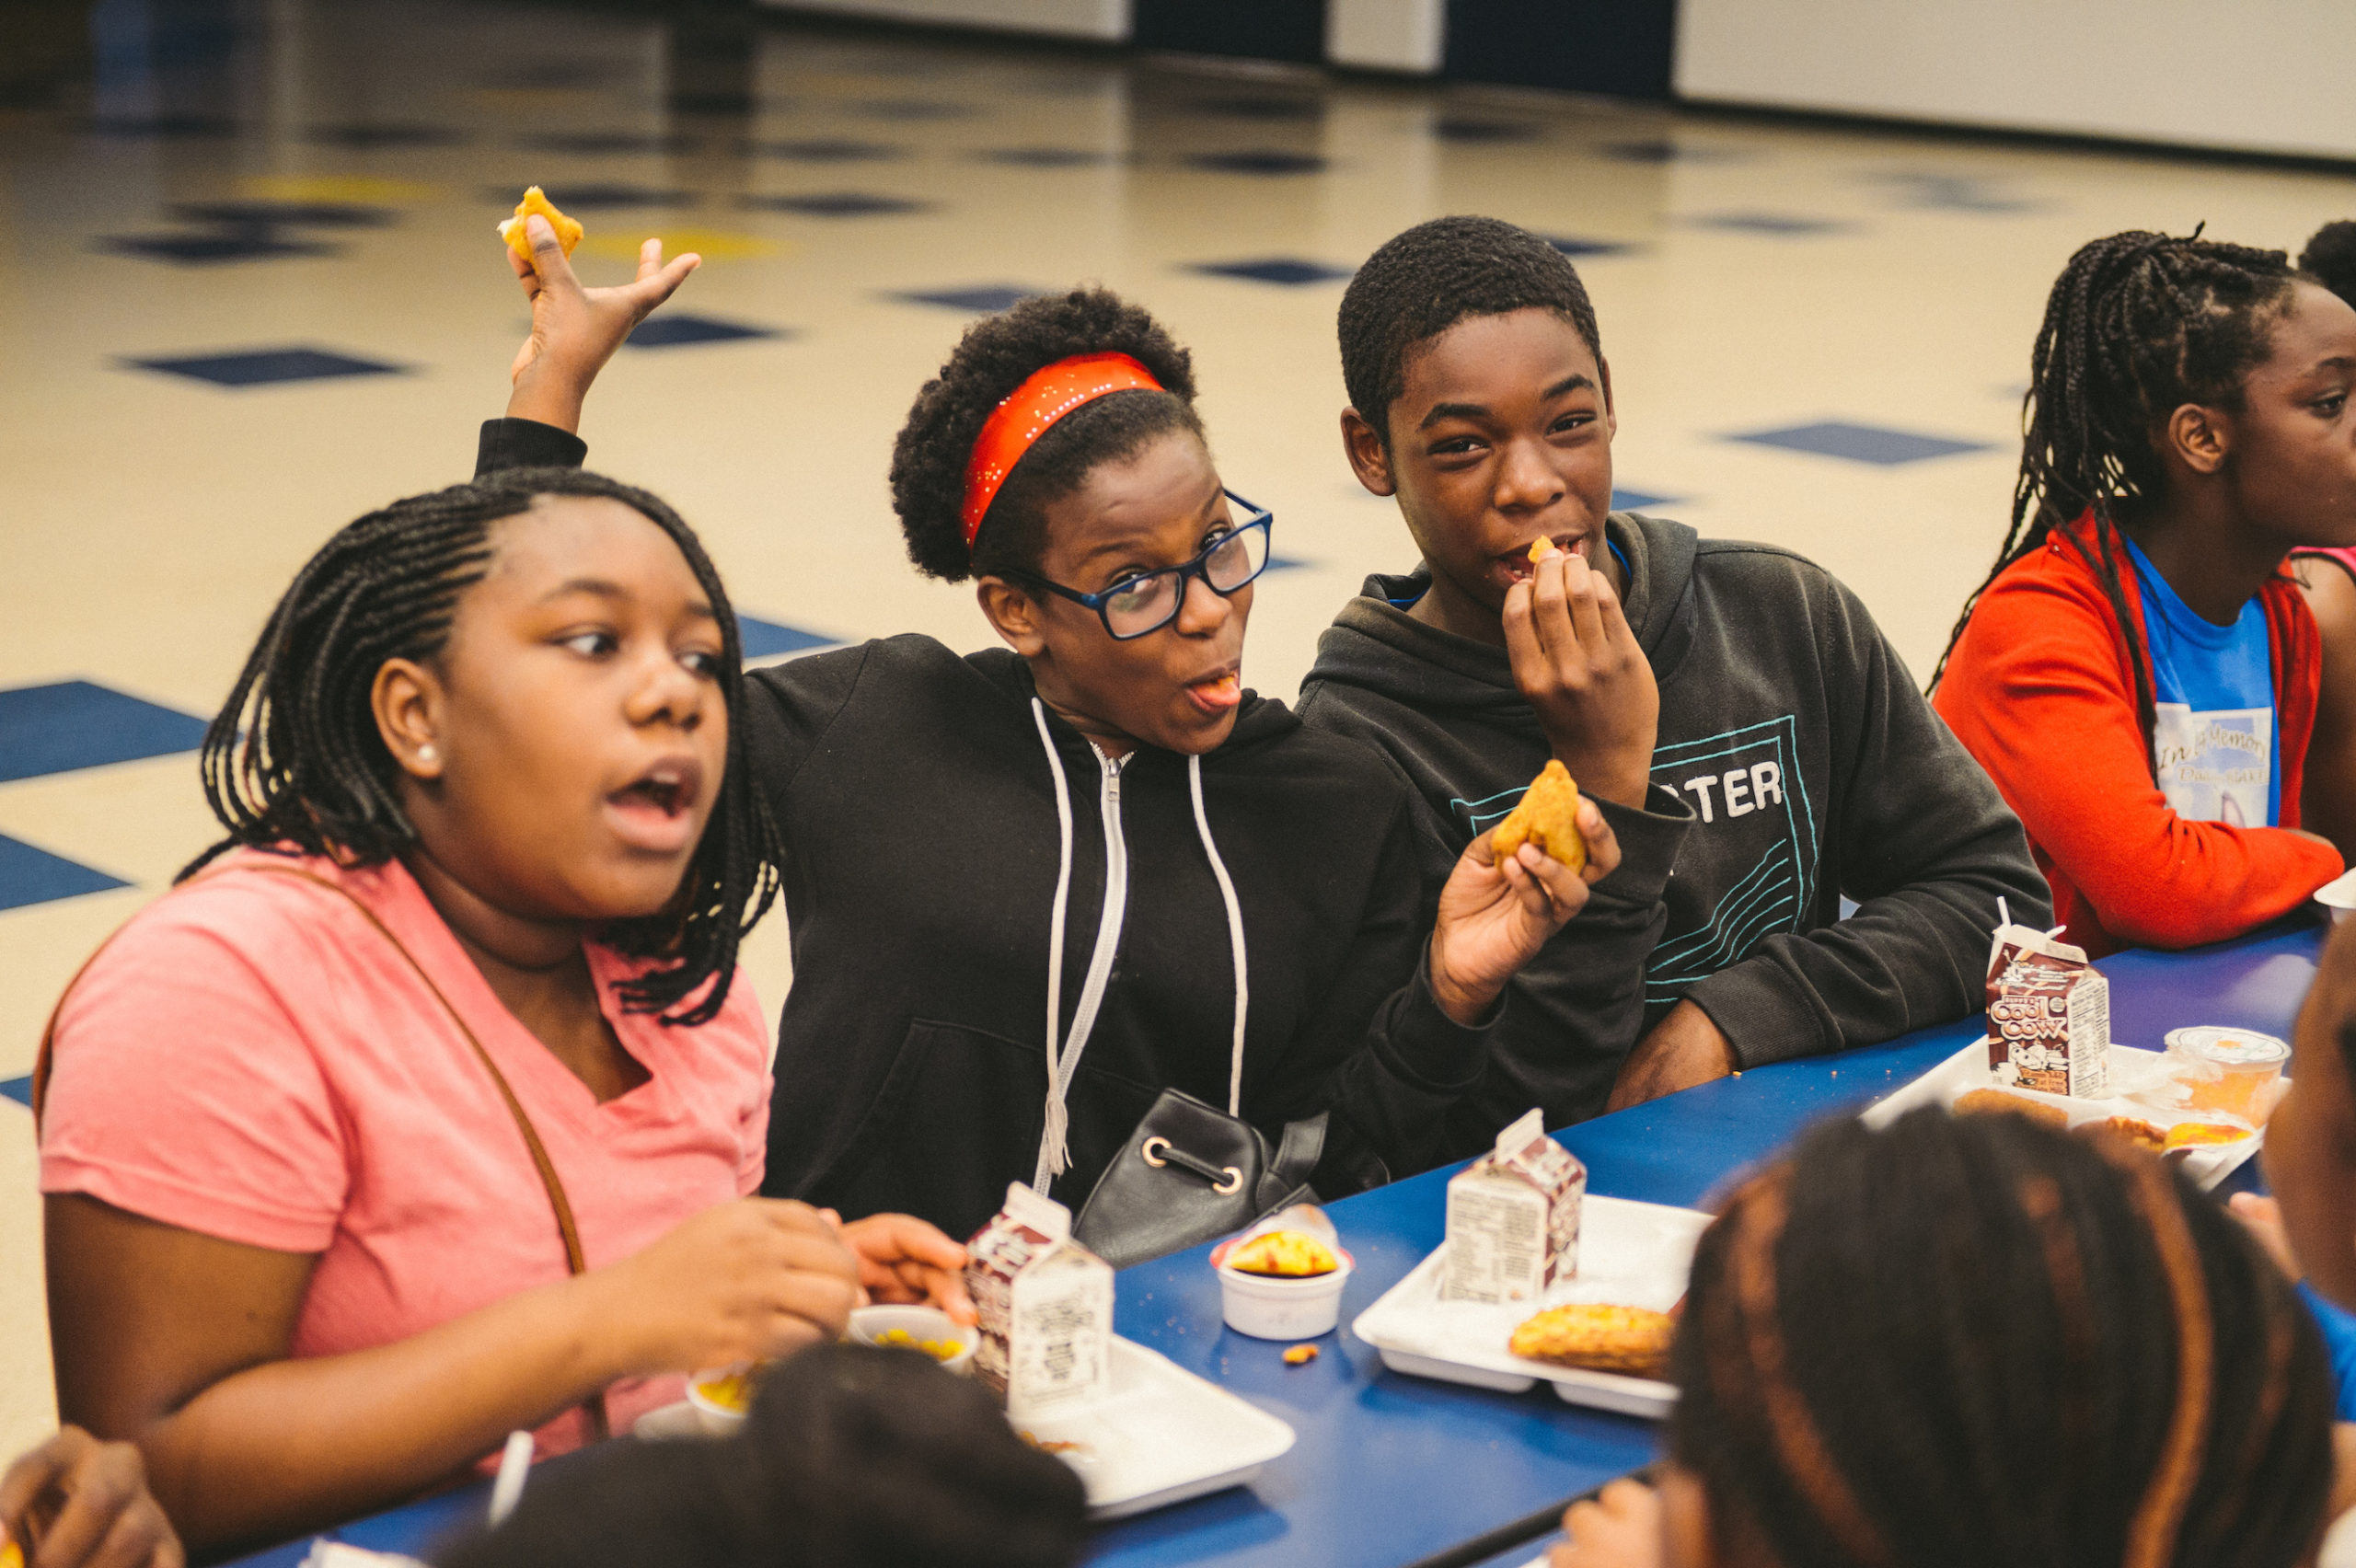 Group of African American young adults enjoying lunch in the cafeteria